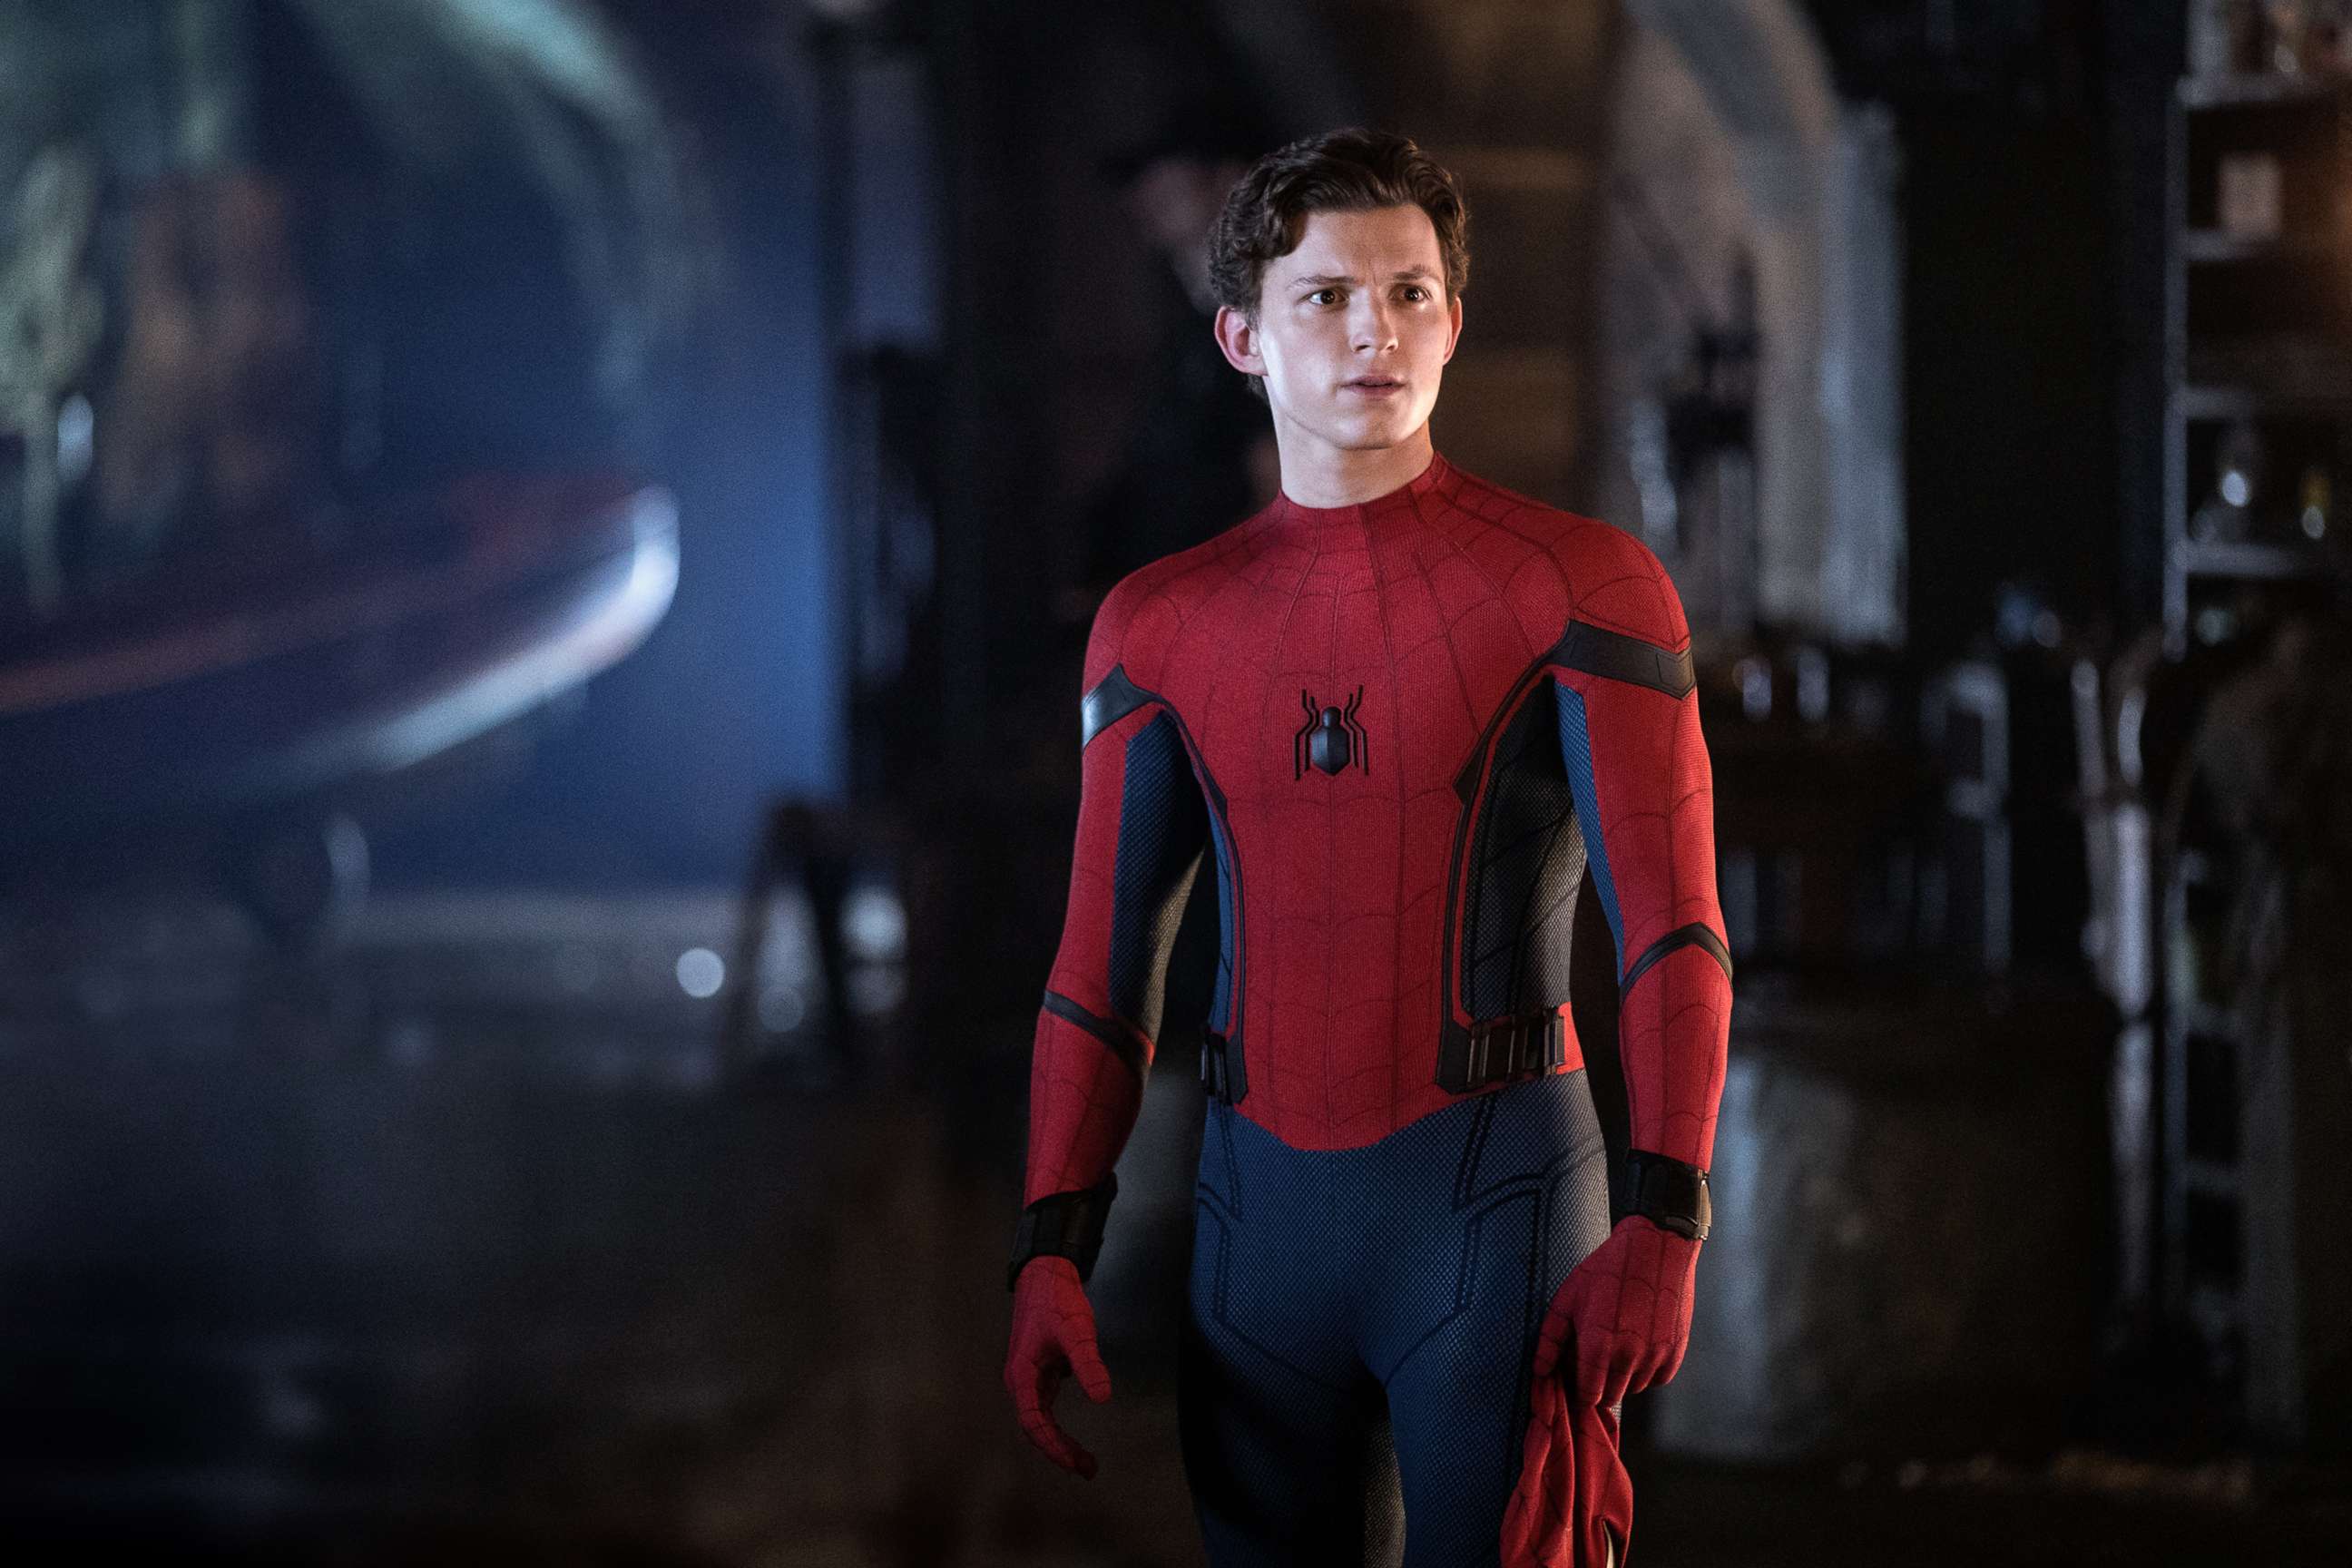 PHOTO: A scene from the movie, "Spider-Man: Far From Home."